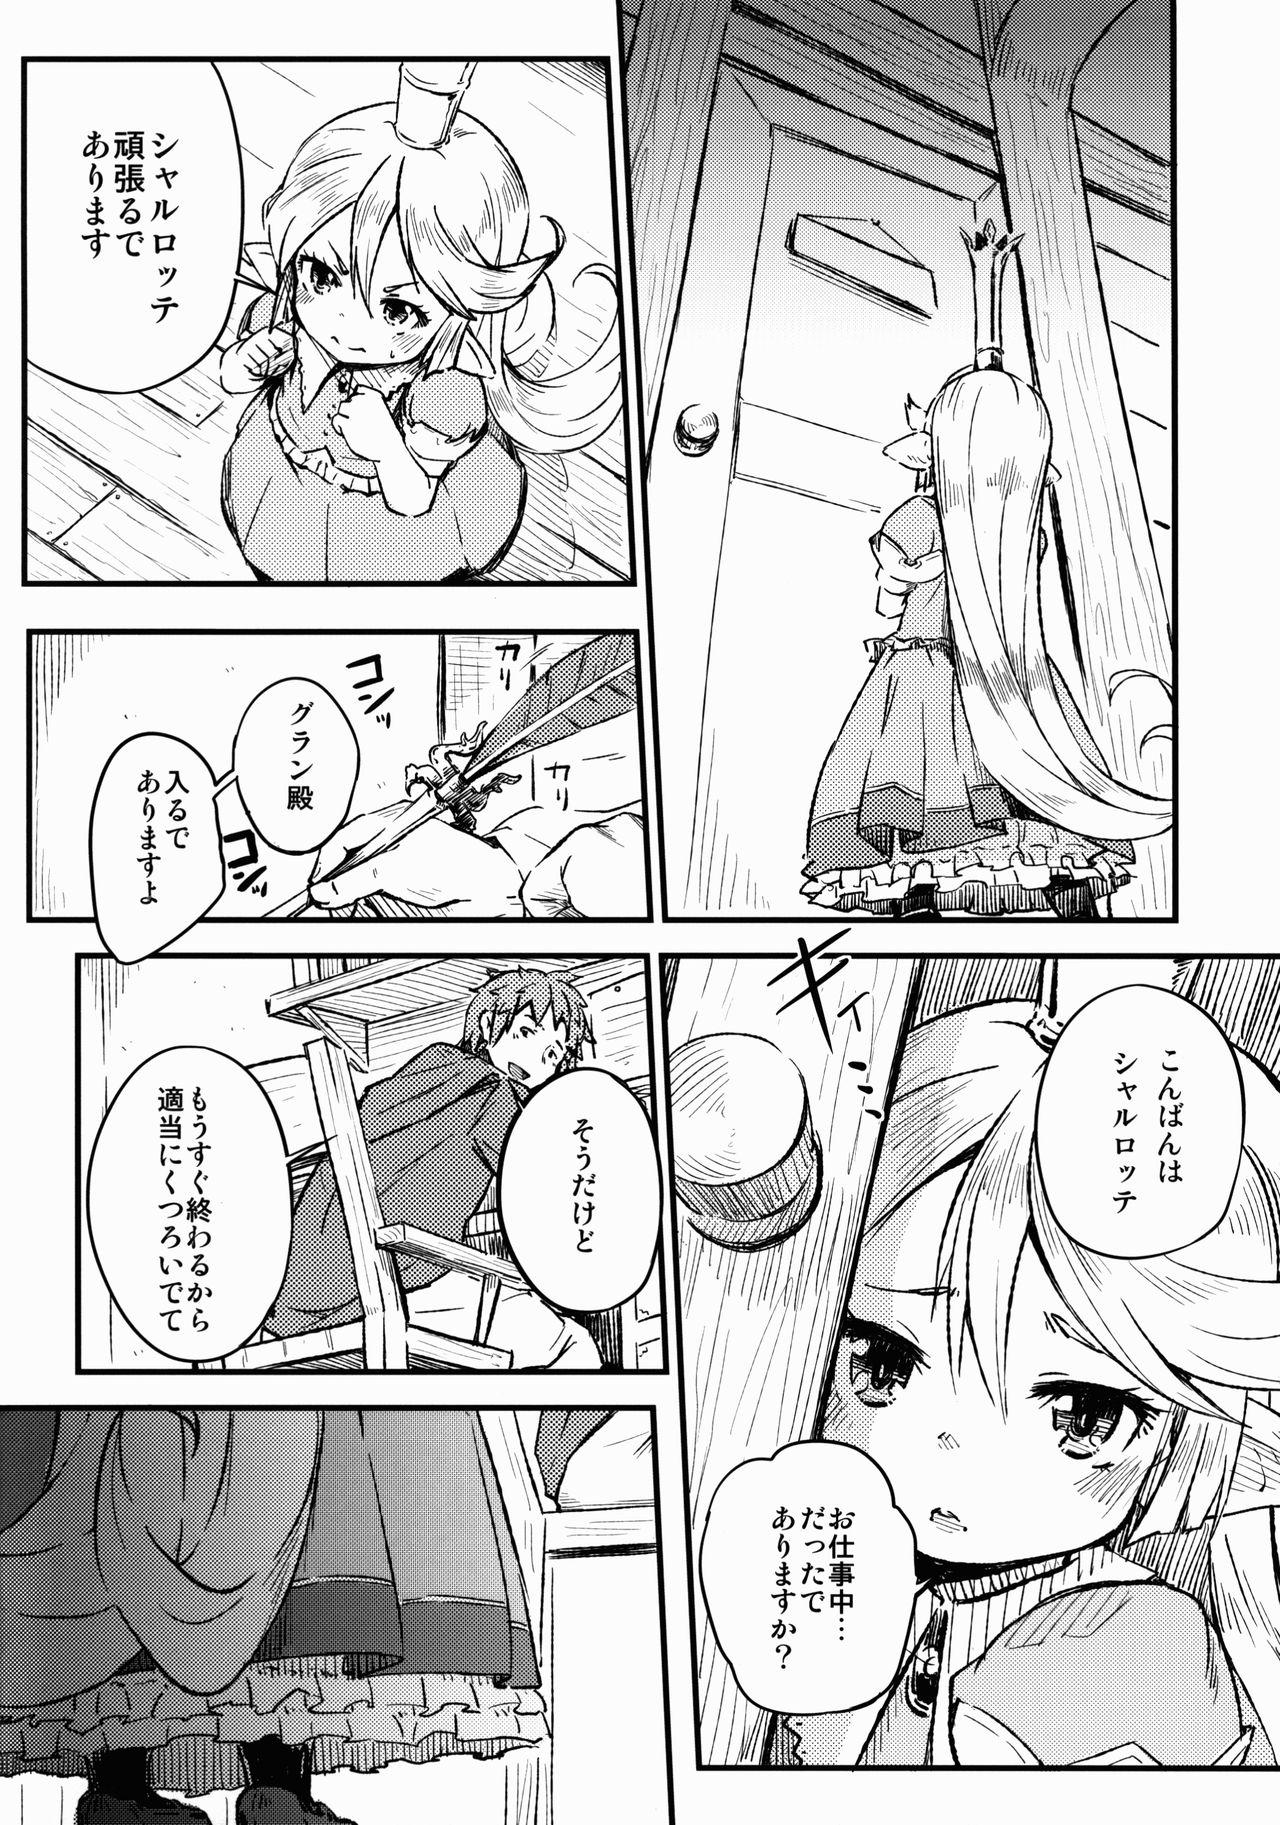 Sis Adult Harvin - Granblue fantasy Making Love Porn - Page 6